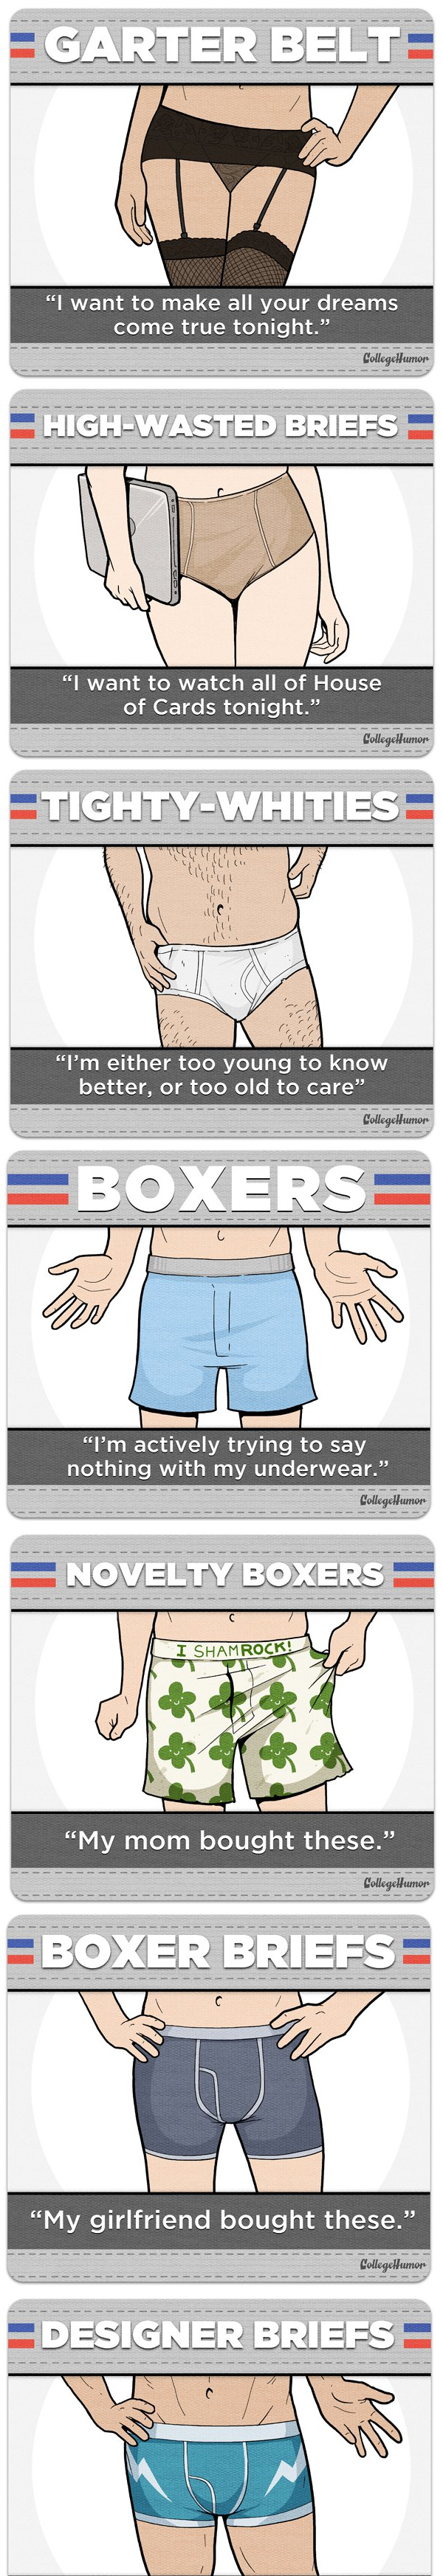 What you're saying with your underwear